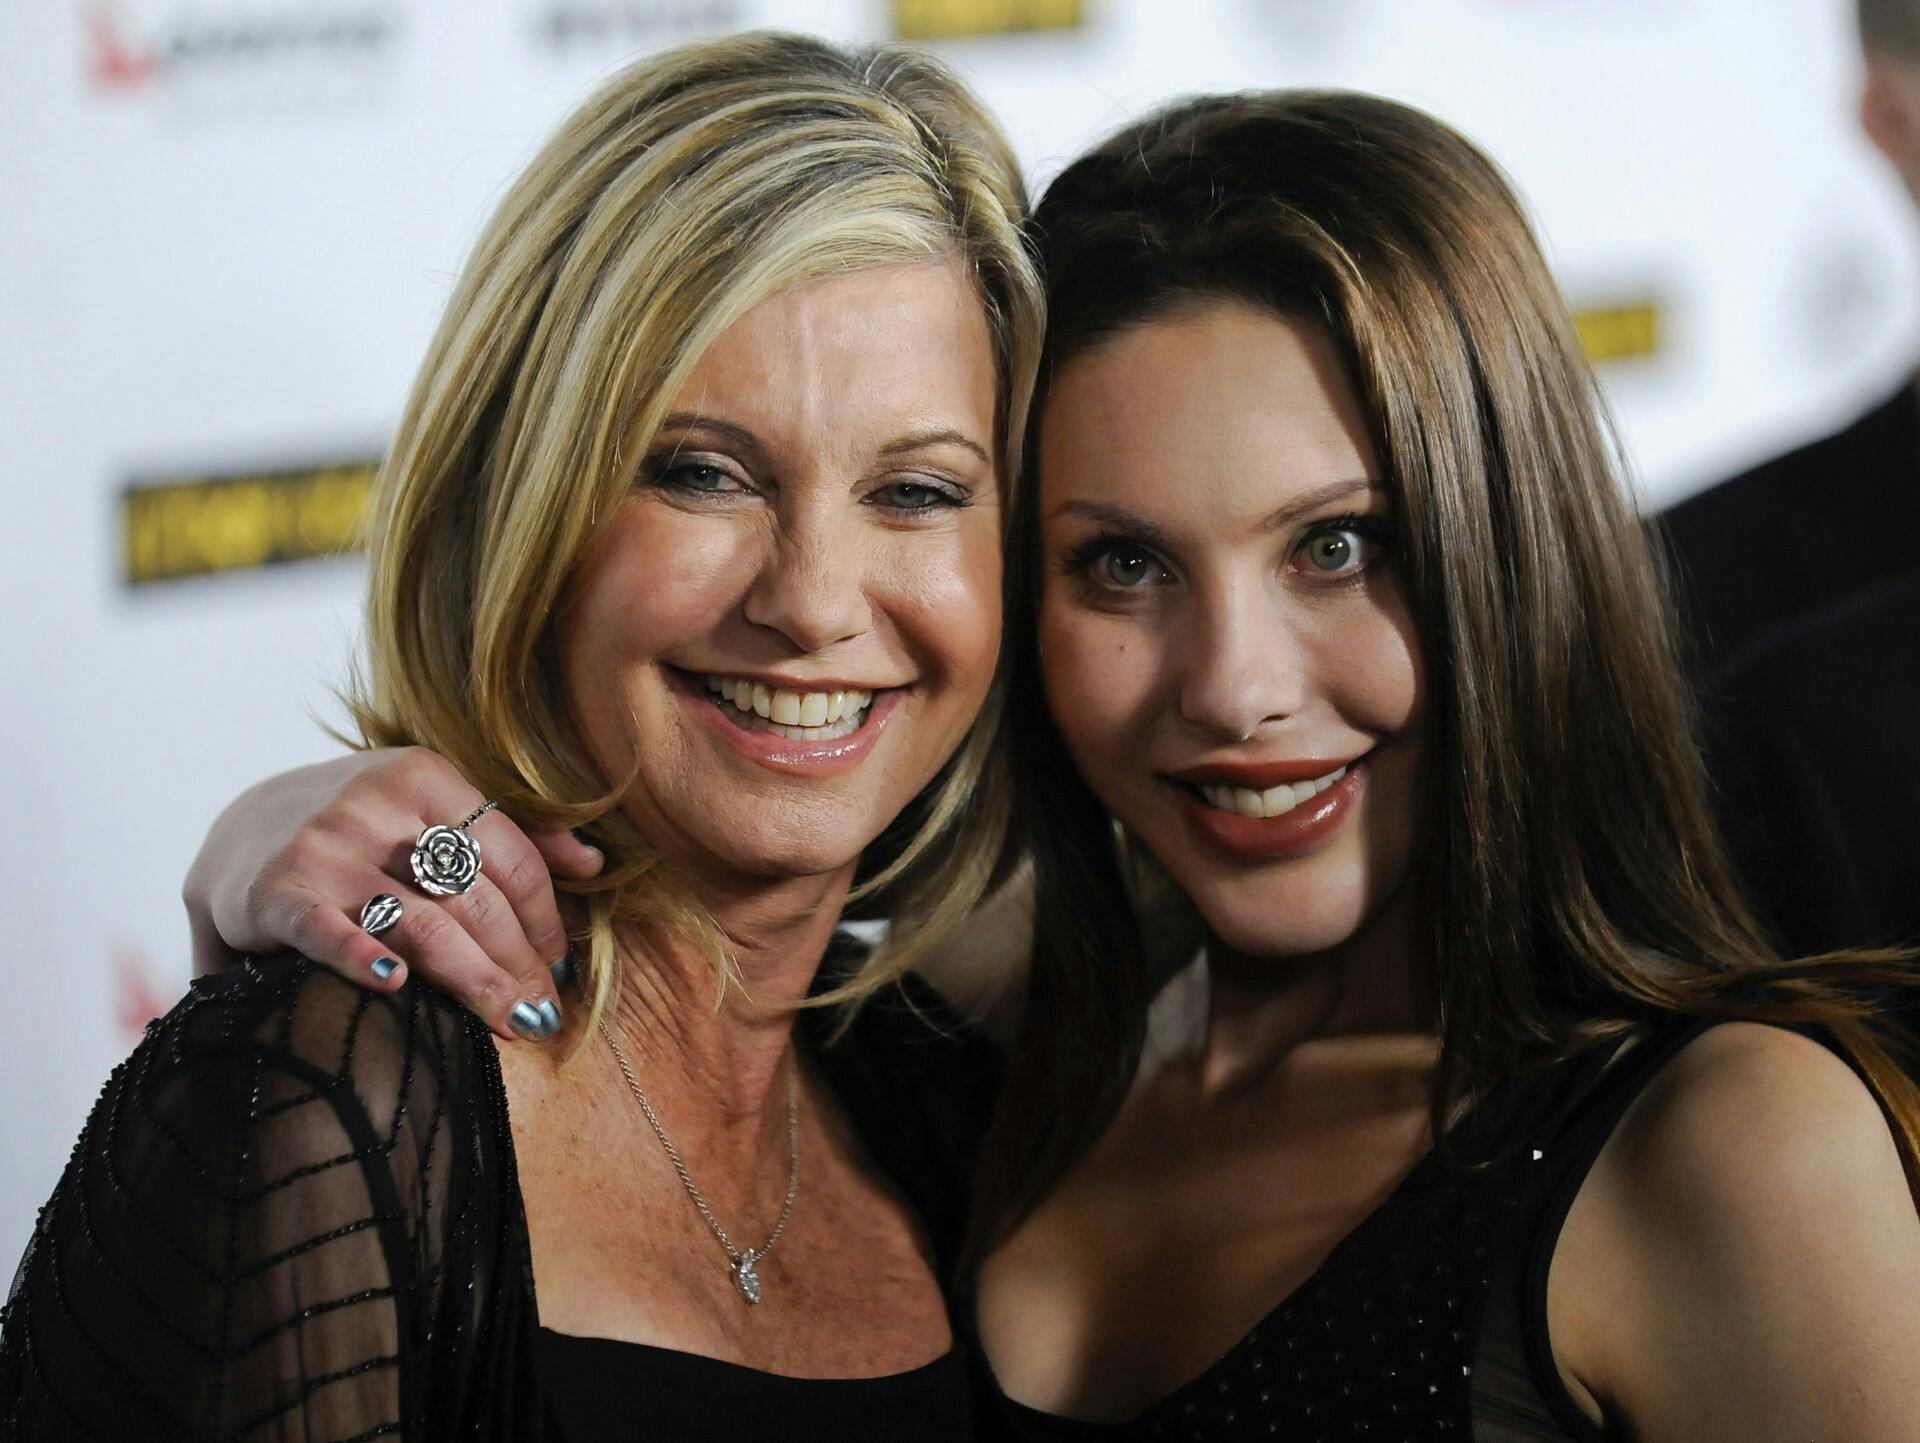 Singer Olivia Newton John and her daughter Chloe Lattanzi (R) arrive at the 2011G'Day USA Los Angeles Black Tie Gala in Los Angeles, California, January 22, 2011. REUTERS/Gus Ruelas (UNITED STATES - Tags: ENTERTAINMENT)